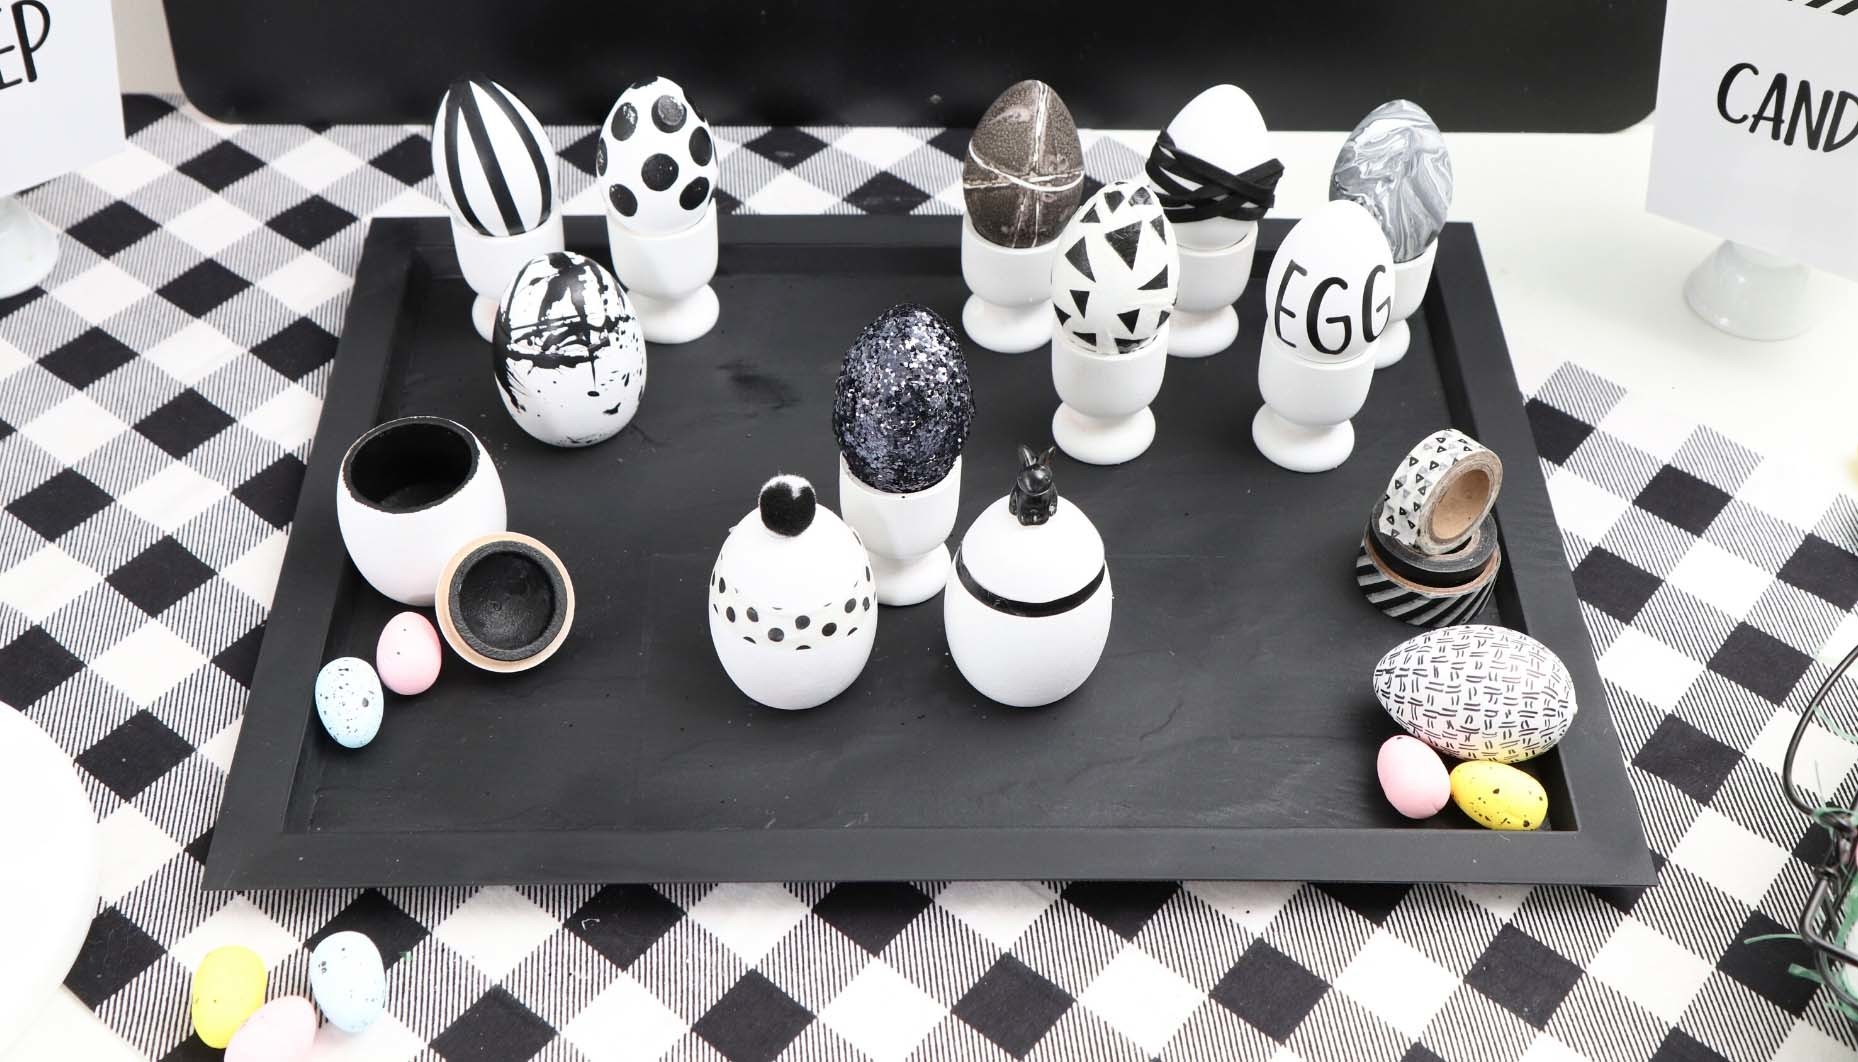 Modern Black and White Easter Egg Decorating Ideas - get details and more Easter activity ideas now at fernandmaple.com!